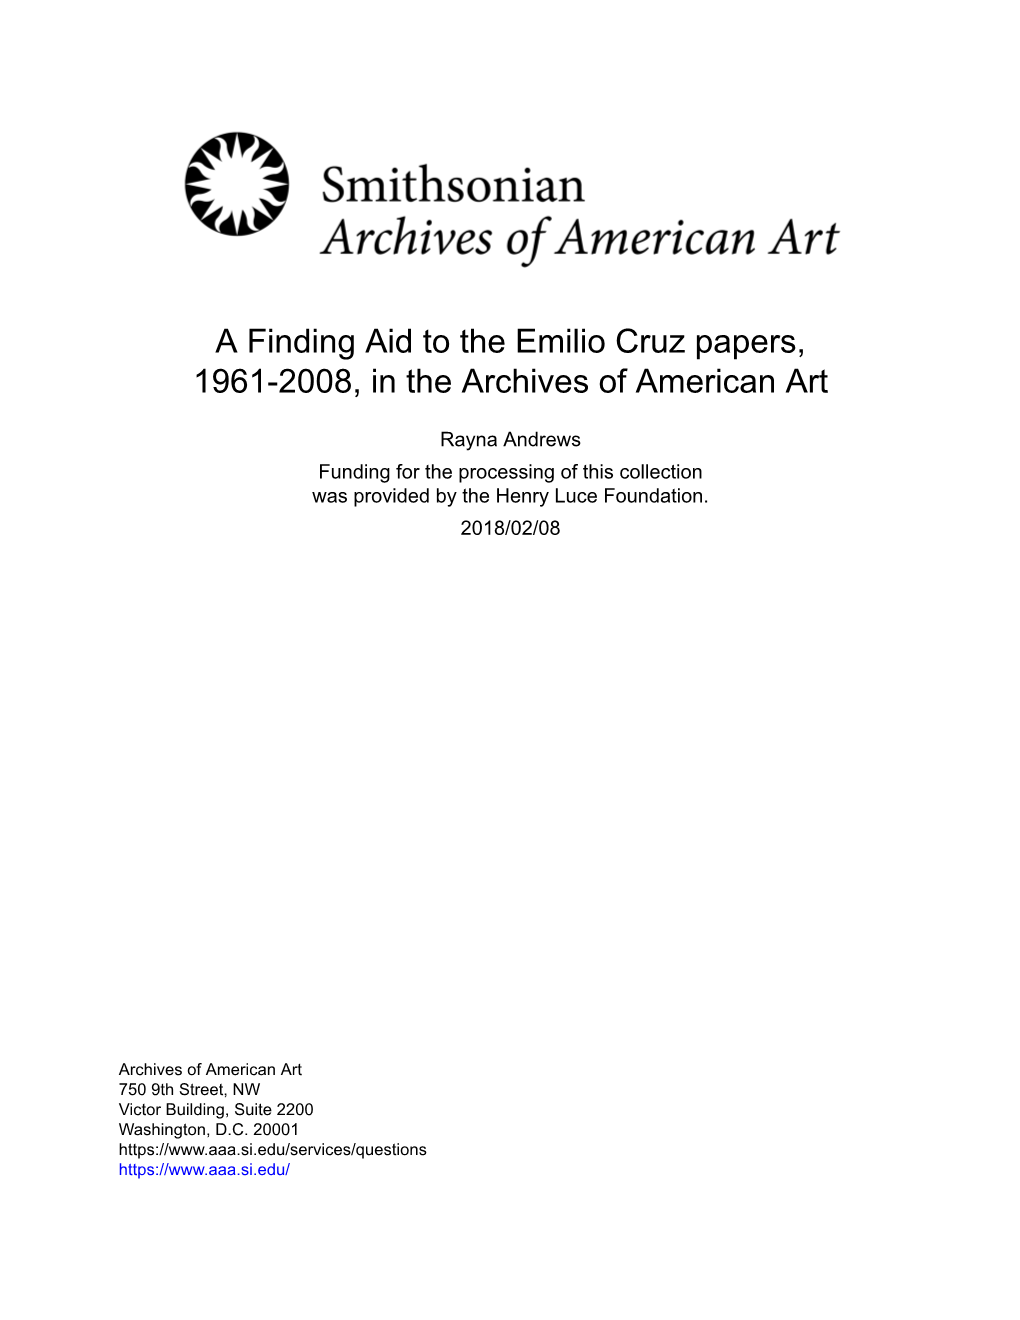 A Finding Aid to the Emilio Cruz Papers, 1961-2008, in the Archives of American Art